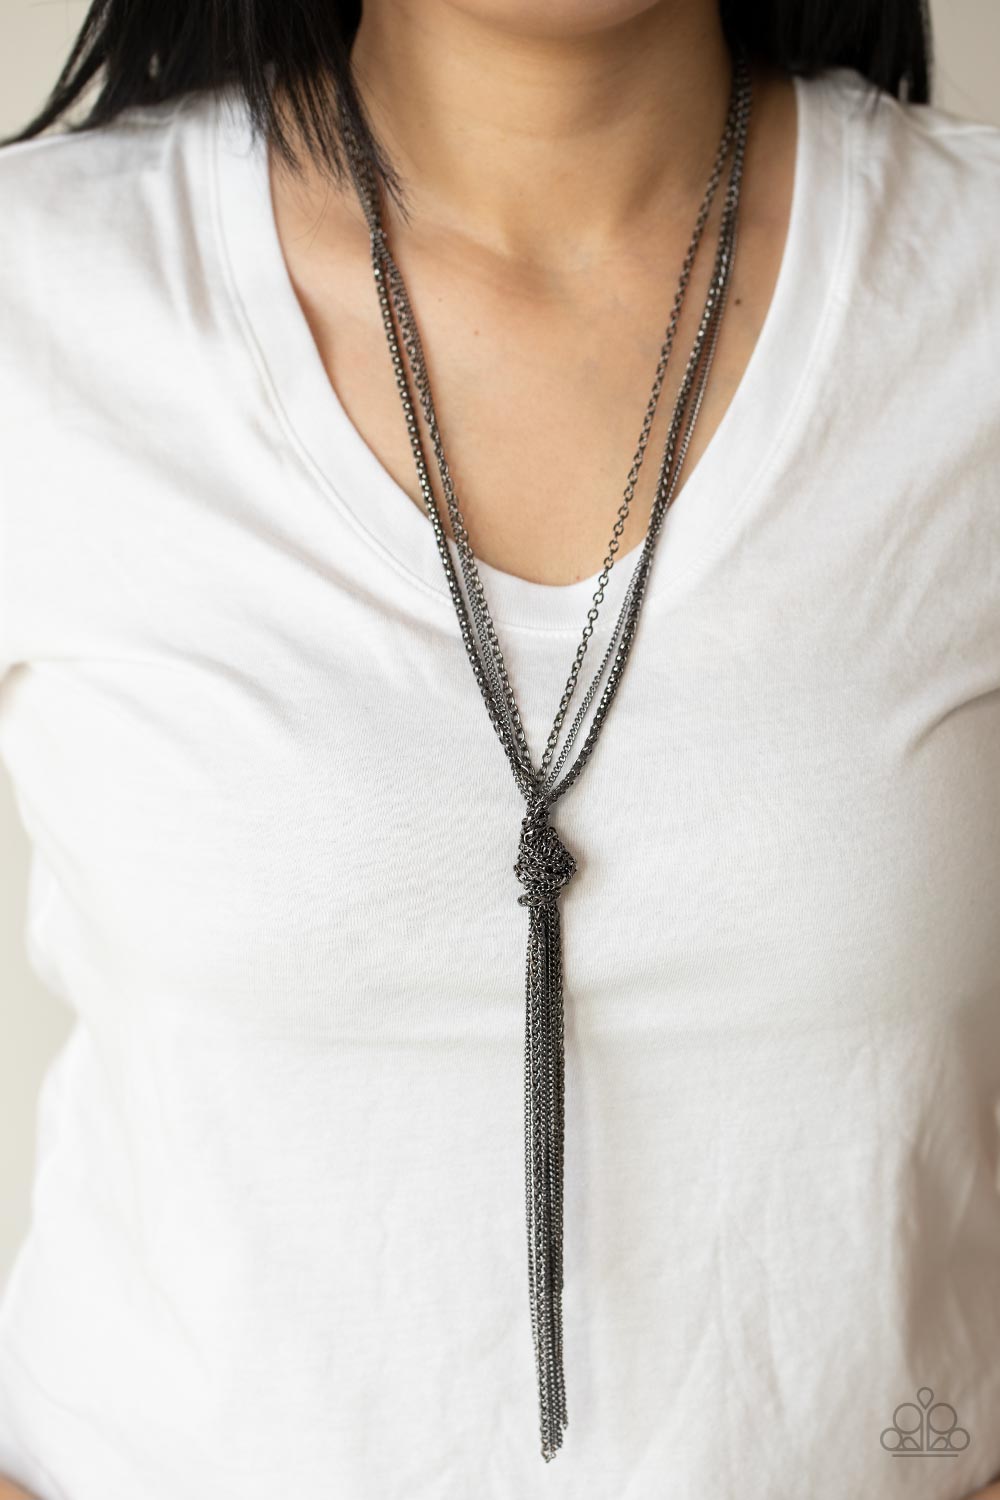 KNOT All There Necklace (Gold, Black, Silver)